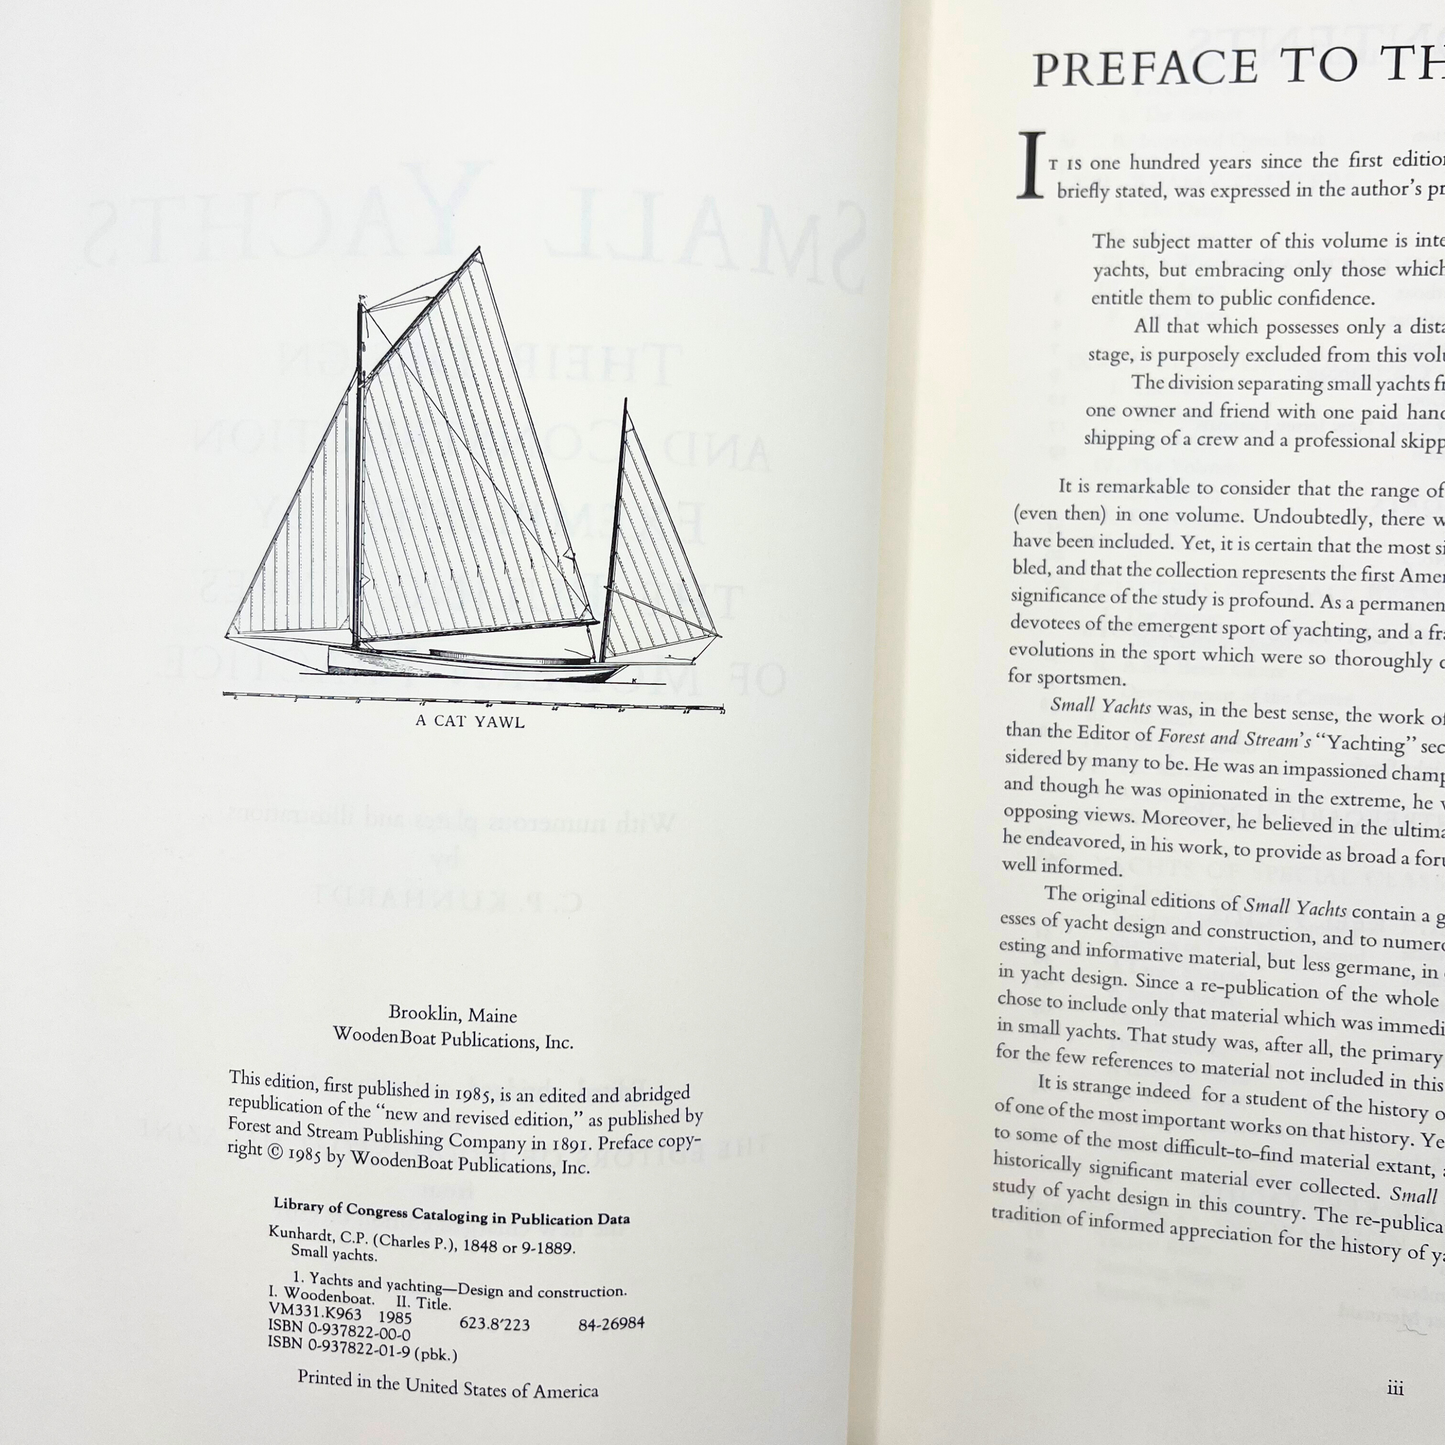 1985 book: Small Yachts